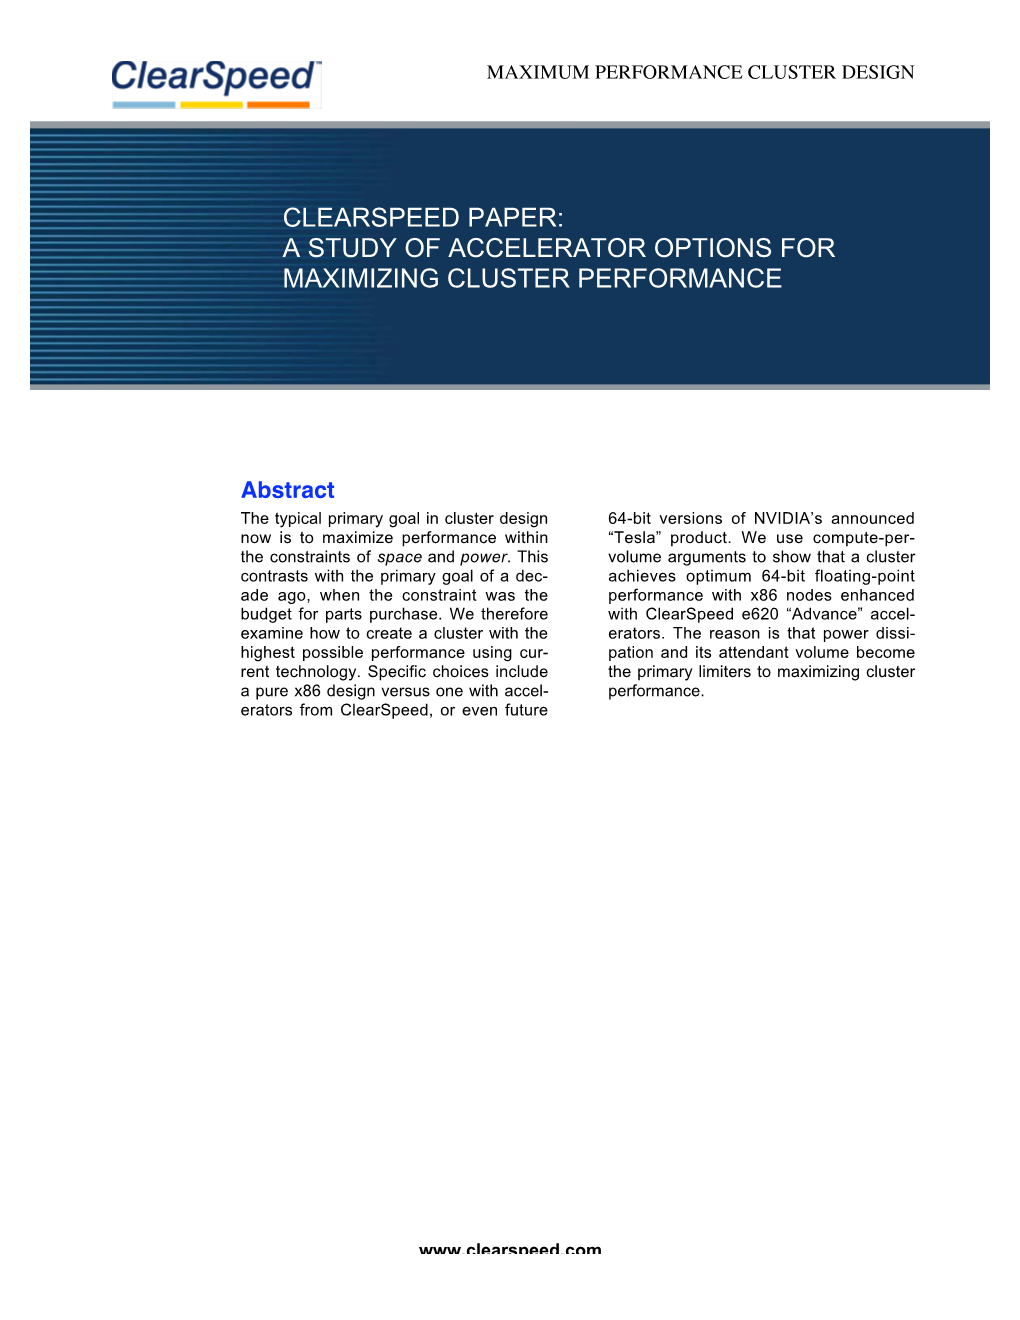 Clearspeed Paper: a Study of Accelerator Options for Maximizing Cluster Performance